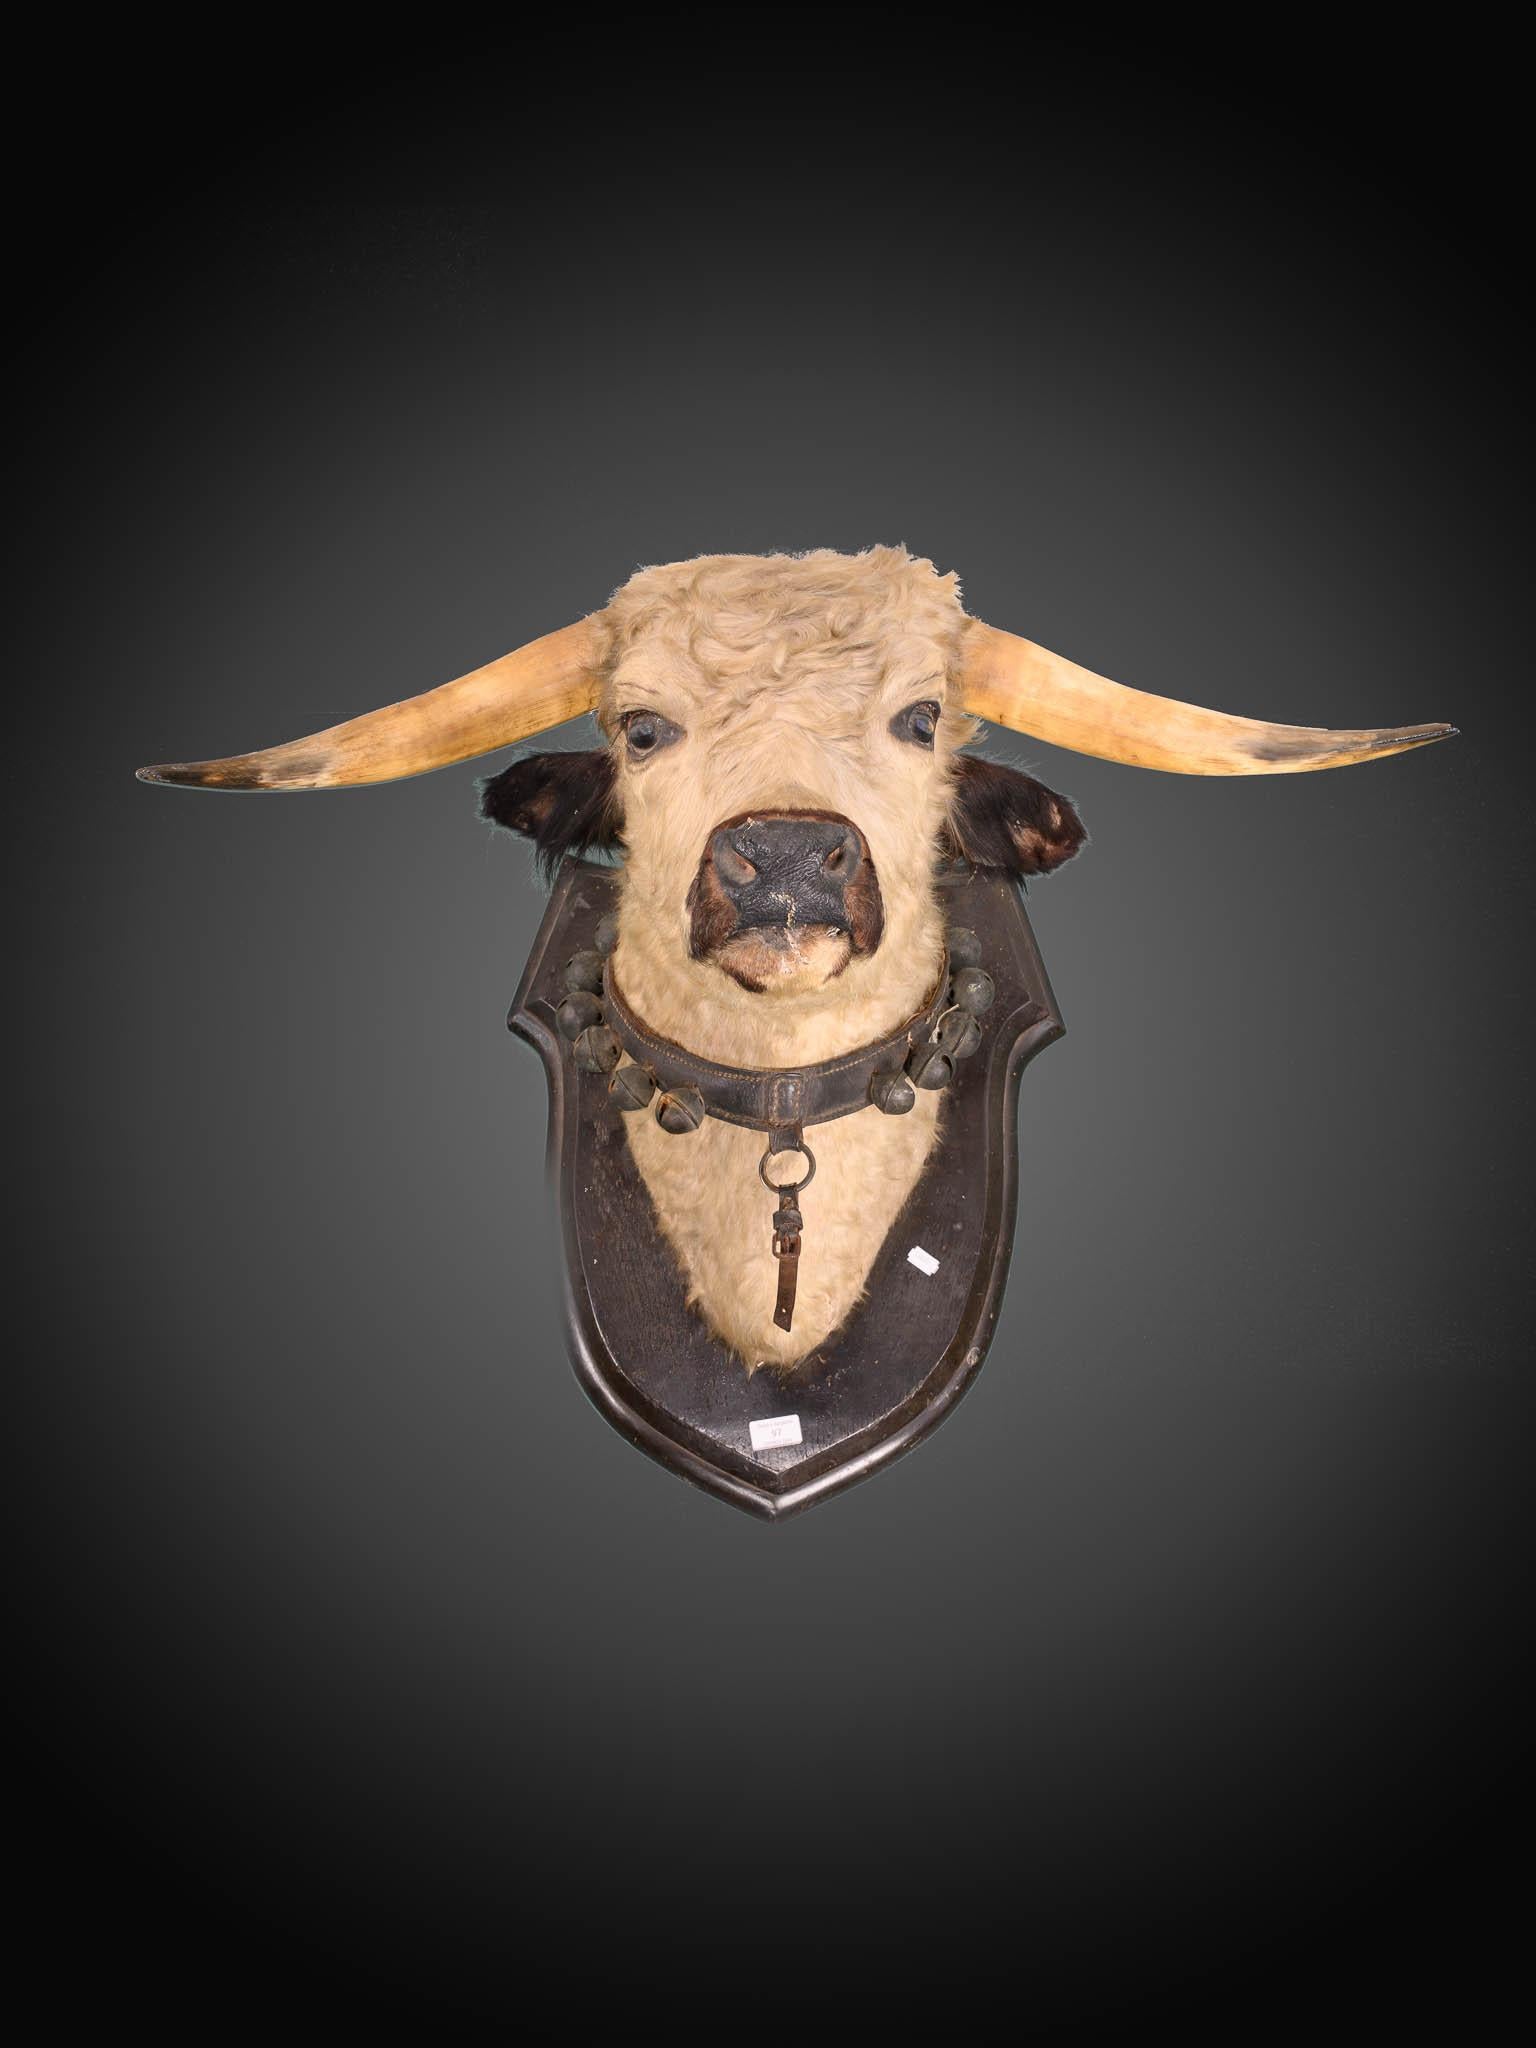 Antique late 19th C Victorian lifesize bull’s head taxidermy with glass eyes on beautiful oak shield wearing a leather collar with brass bell

The mount has a leather collar with brass bell

Provenance: The Richard Pratley Collection